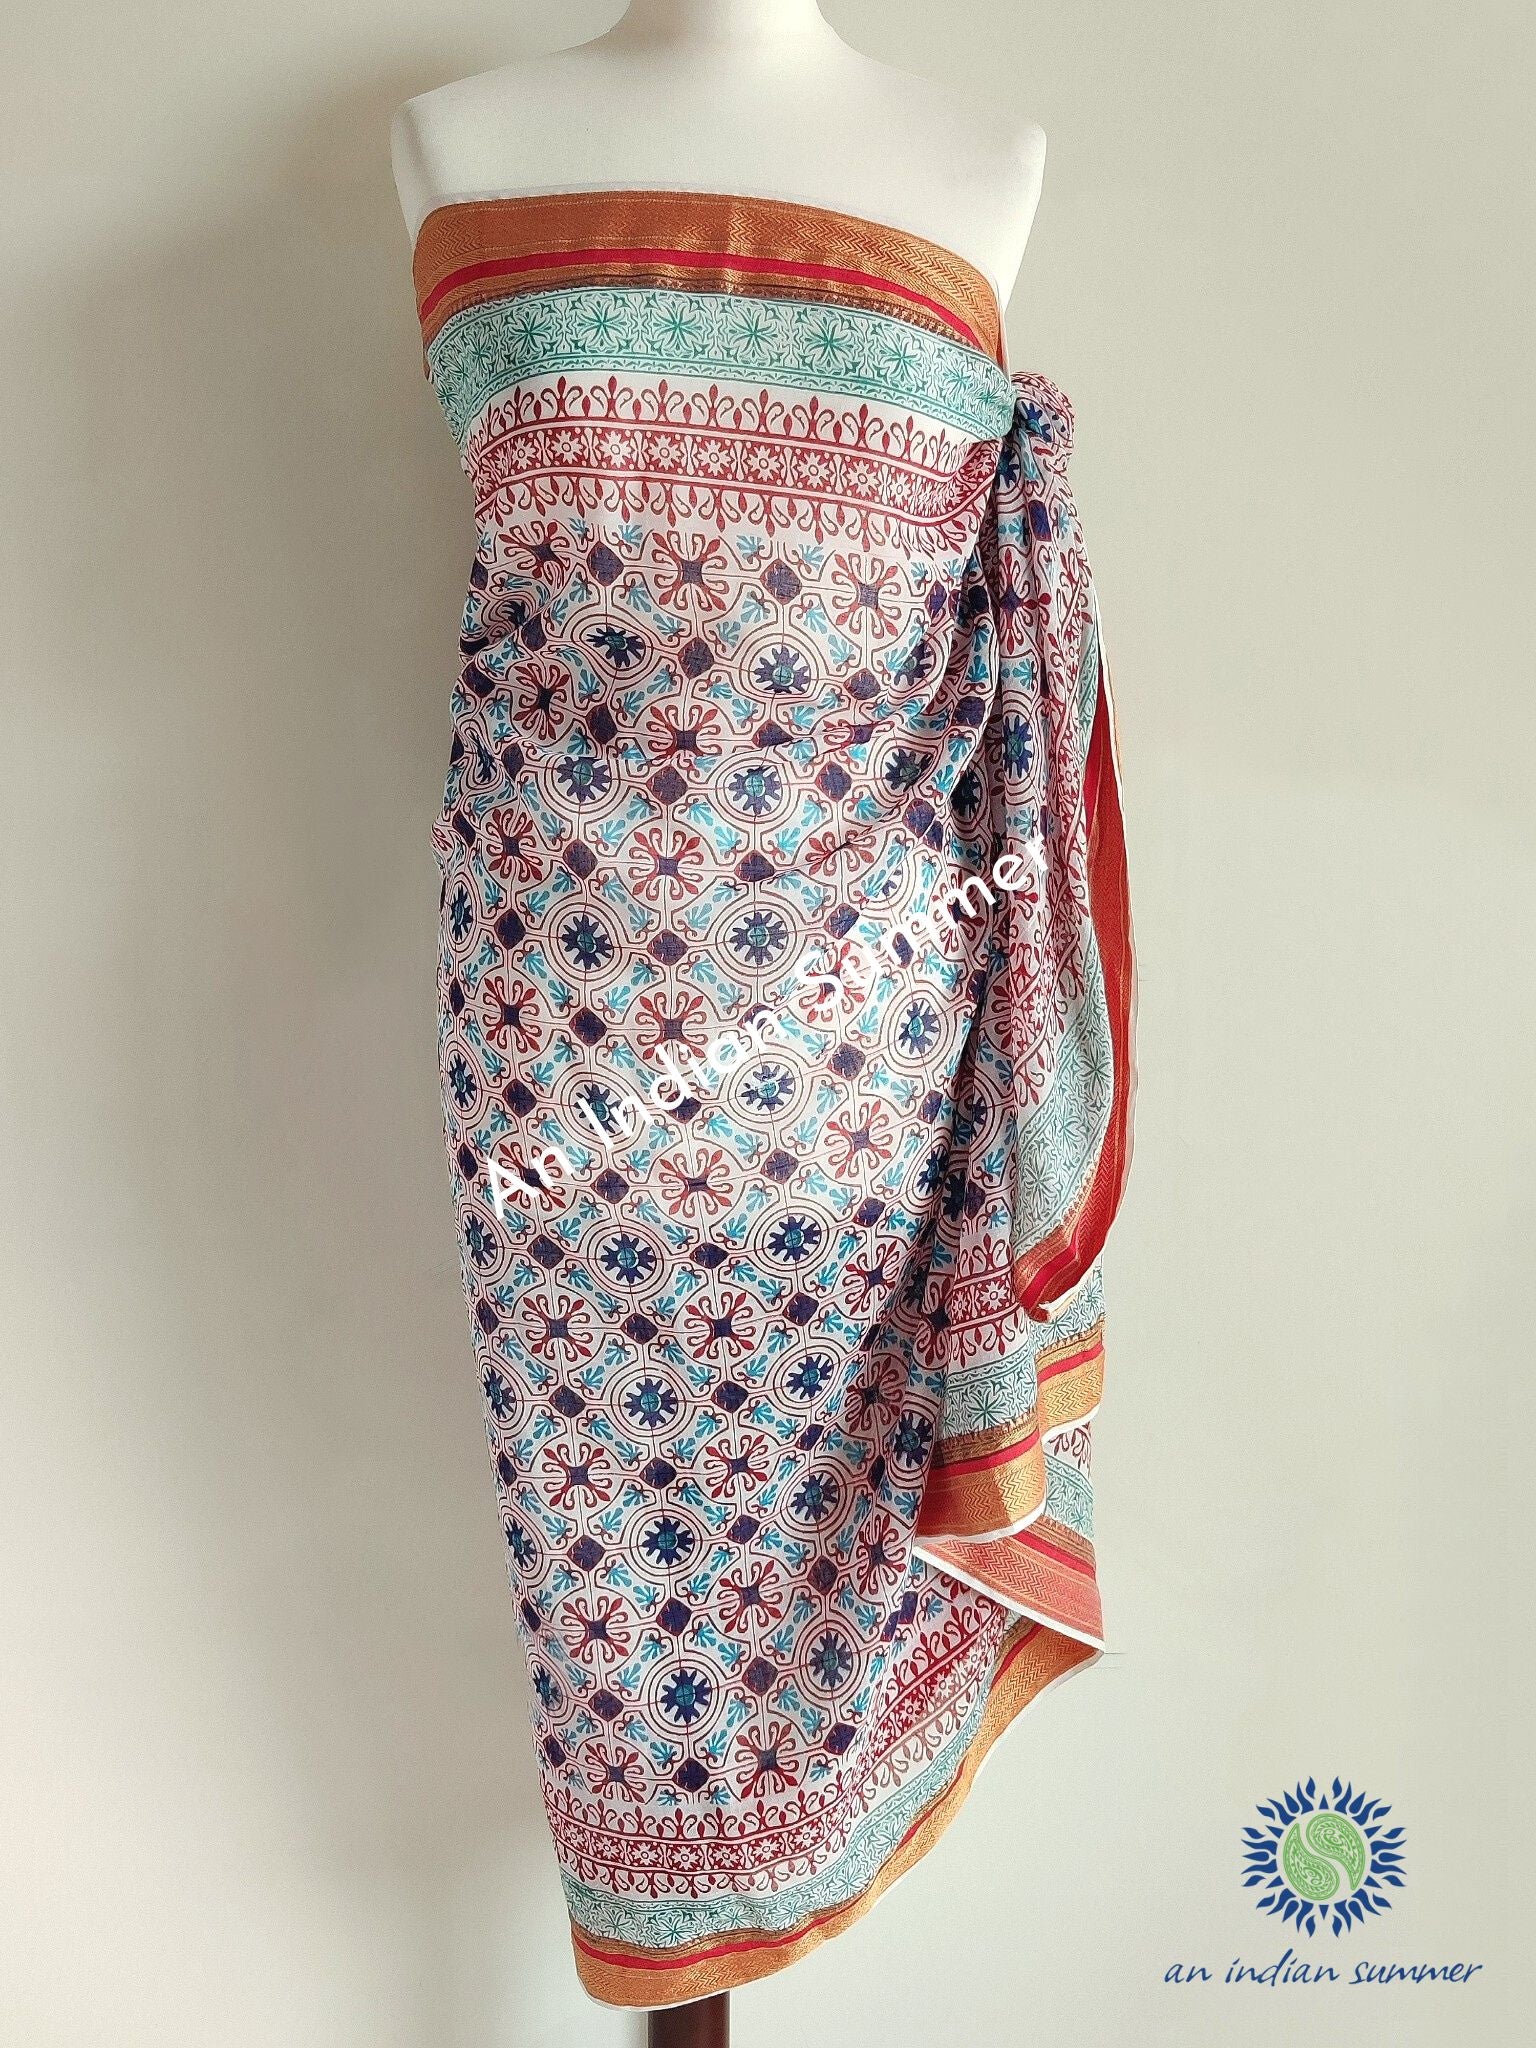 Tile Print Woven Border Sarong Pareo | Red | Hand Block Printed | Soft Cotton Voile | An Indian Summer | Seasonless Timeless Sustainable Ethical Authentic Artisan Conscious Clothing Lifestyle Brand